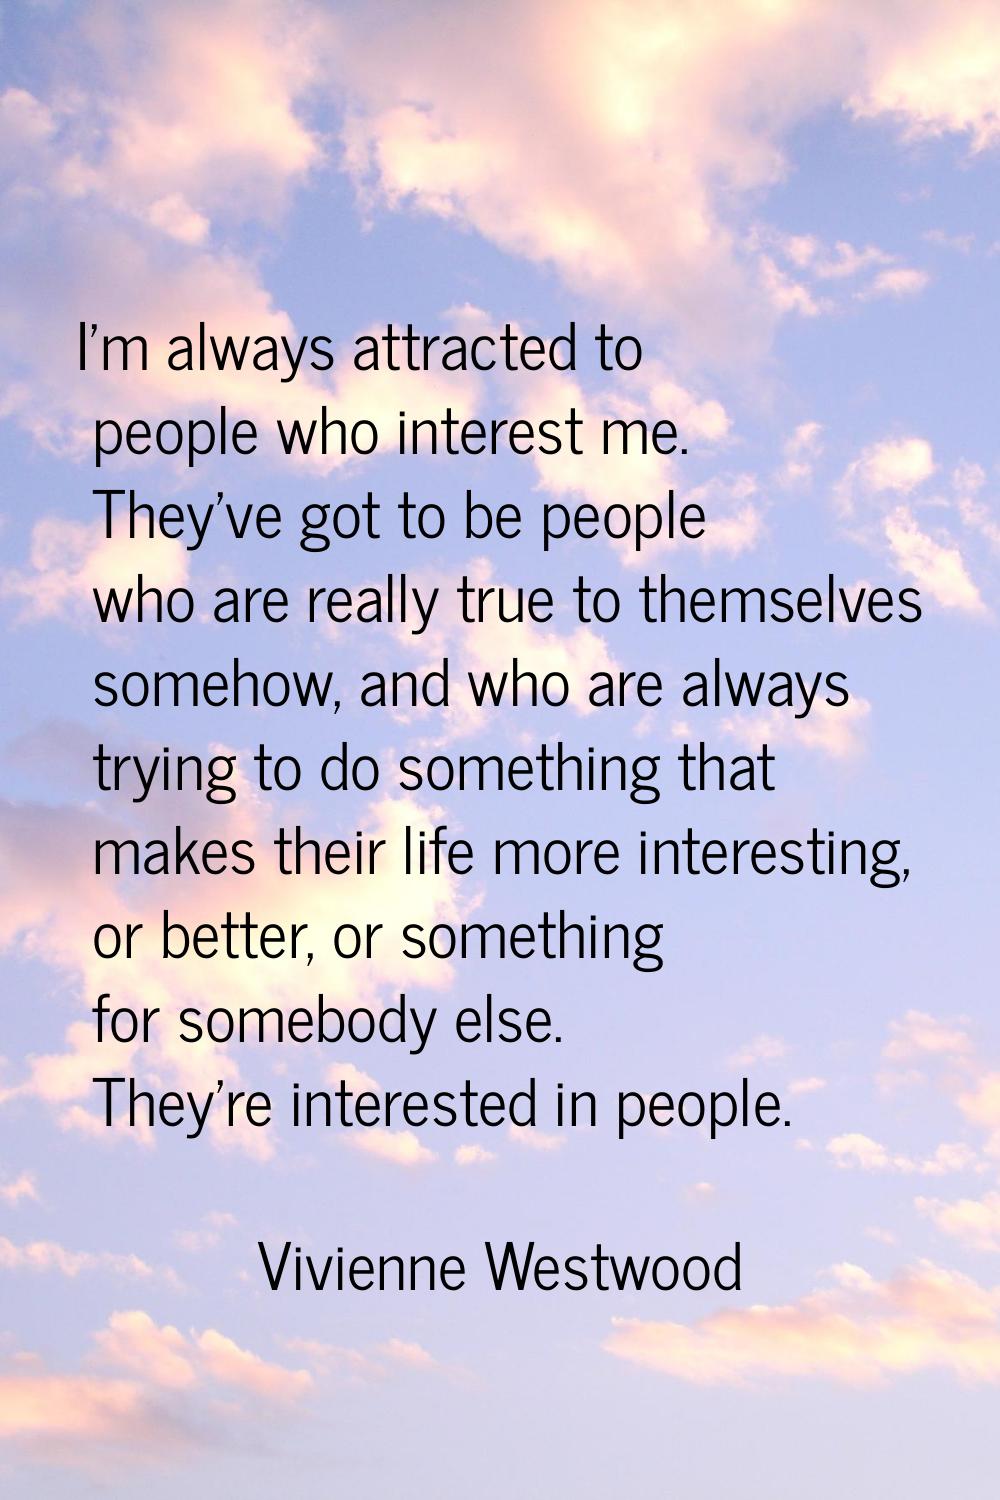 I'm always attracted to people who interest me. They've got to be people who are really true to the